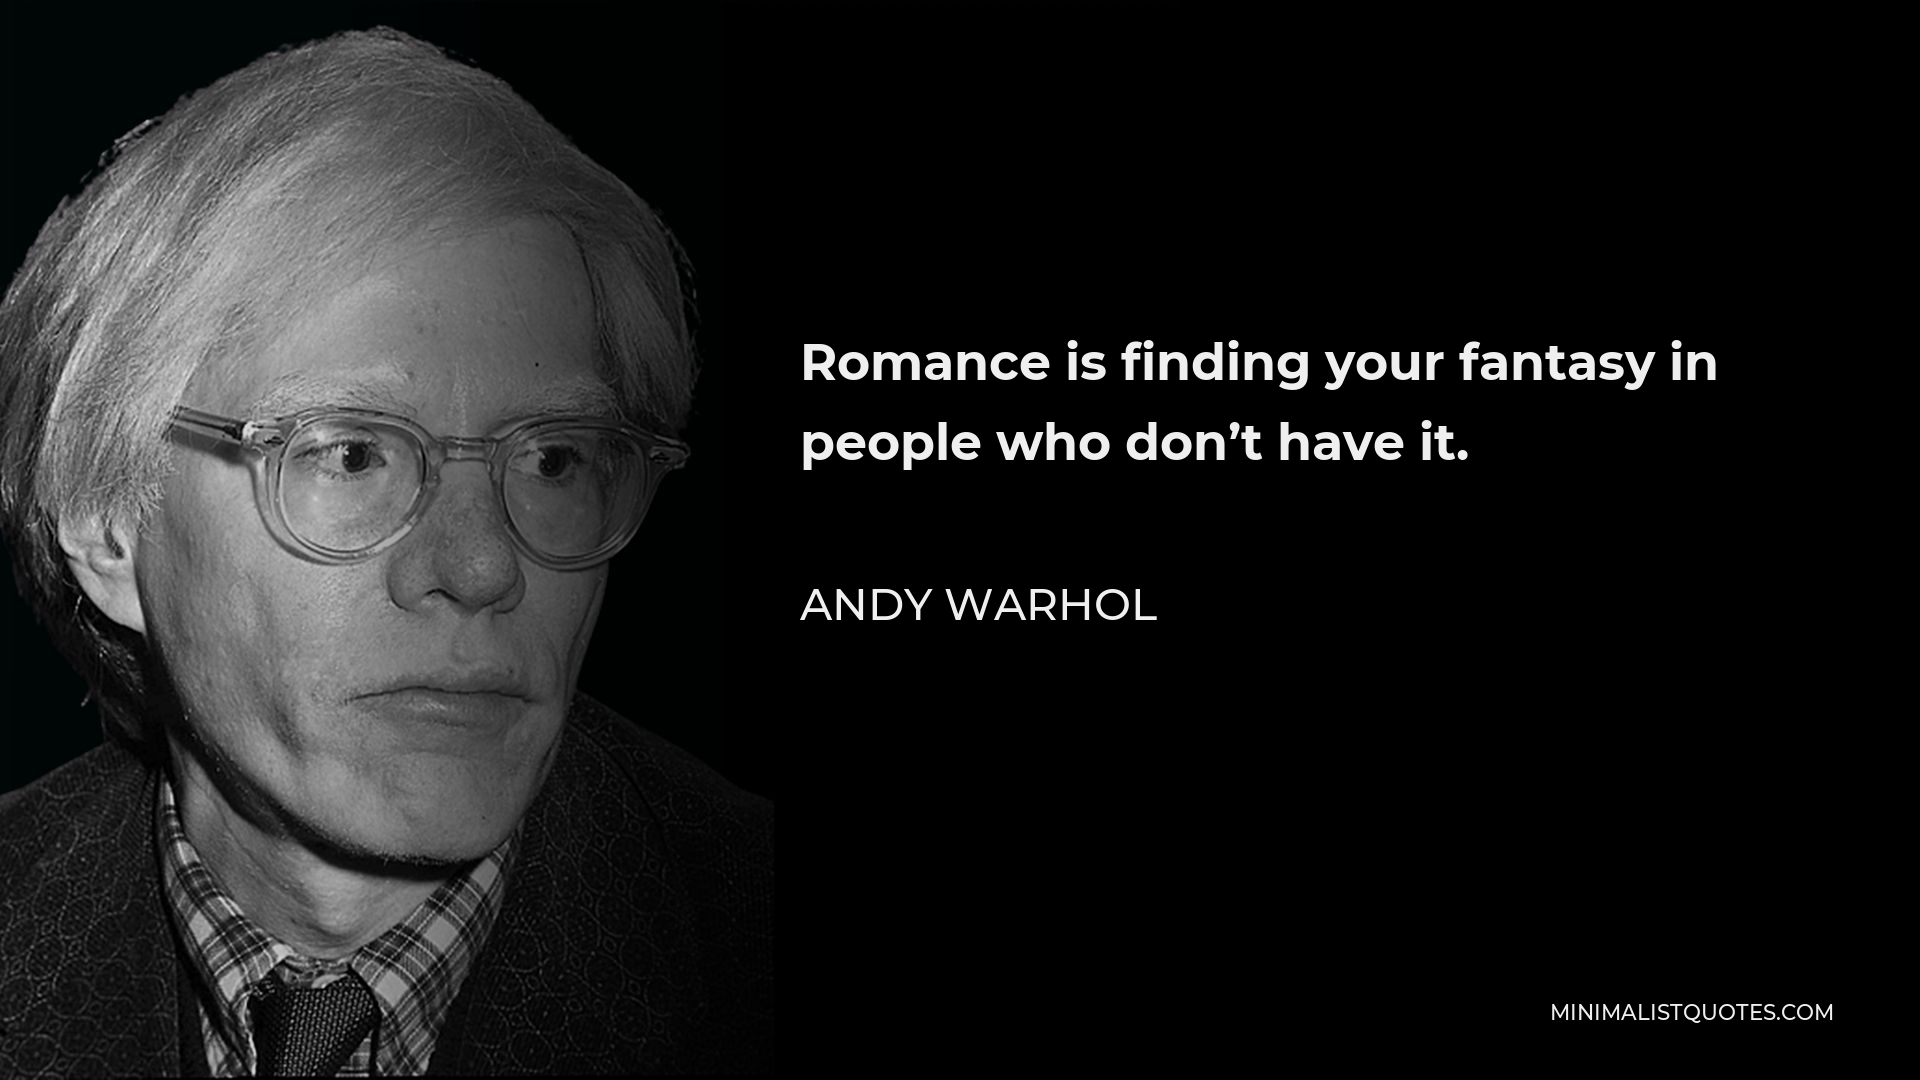 Andy Warhol Quote - Romance is finding your fantasy in people who don’t have it.